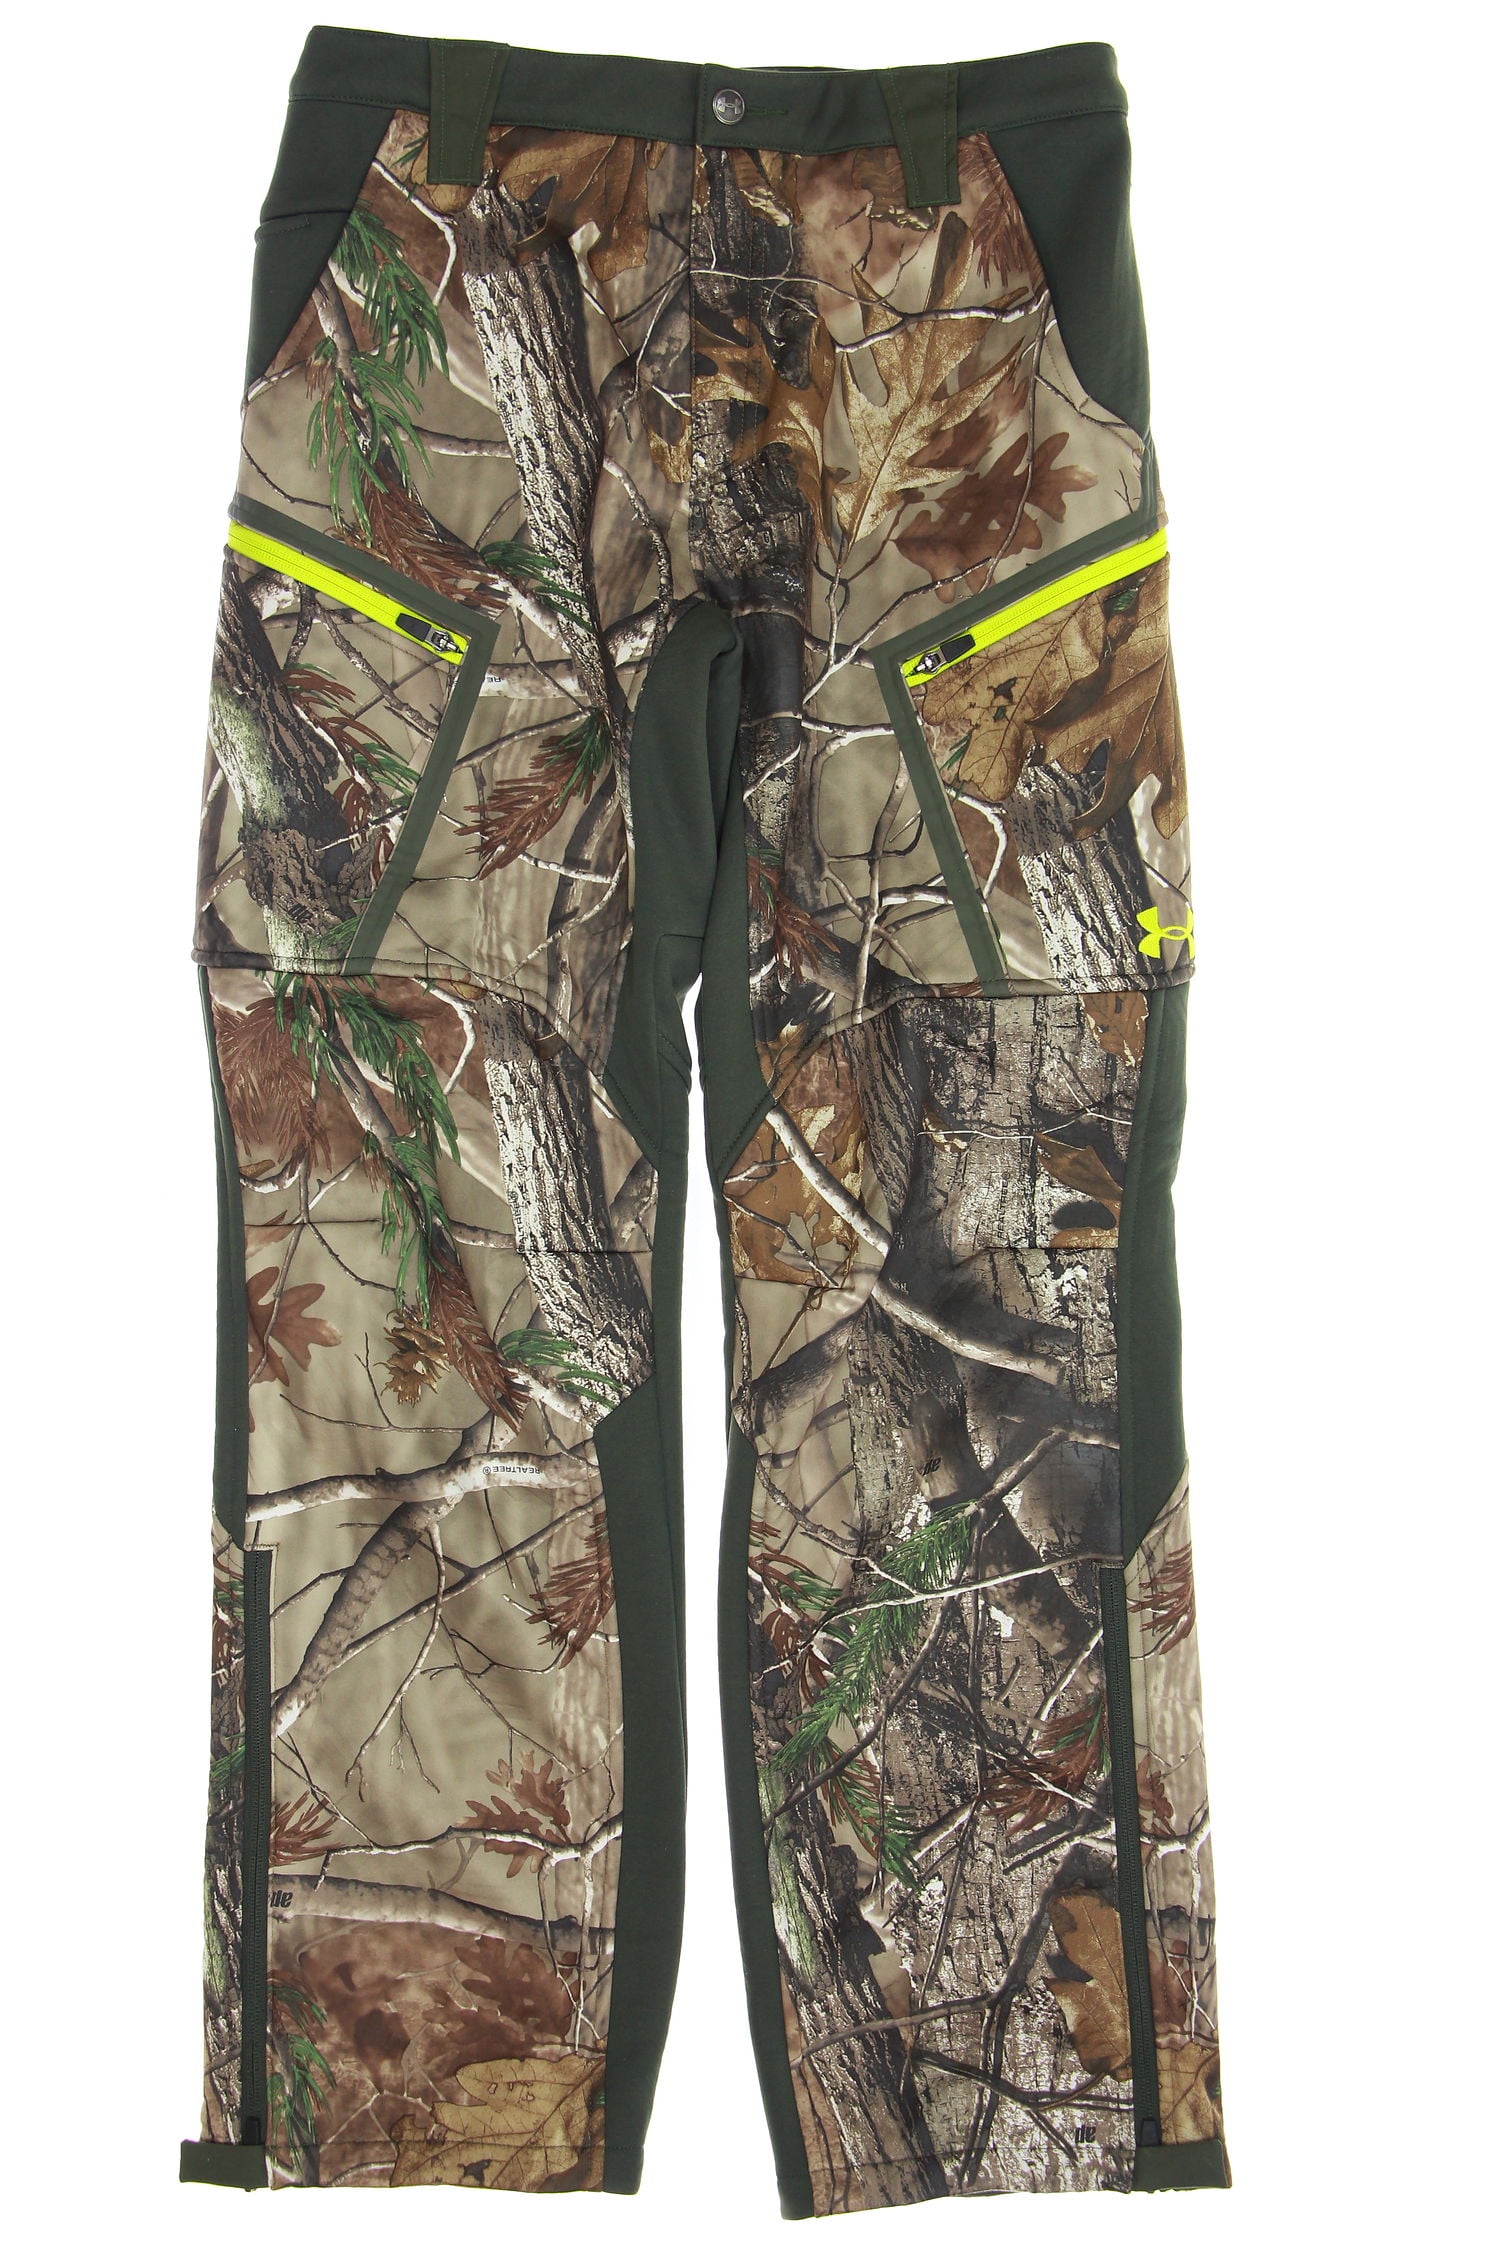 Details about   Under Armour Mens Storm Performance Field Realtree Pants 42W X 32L 